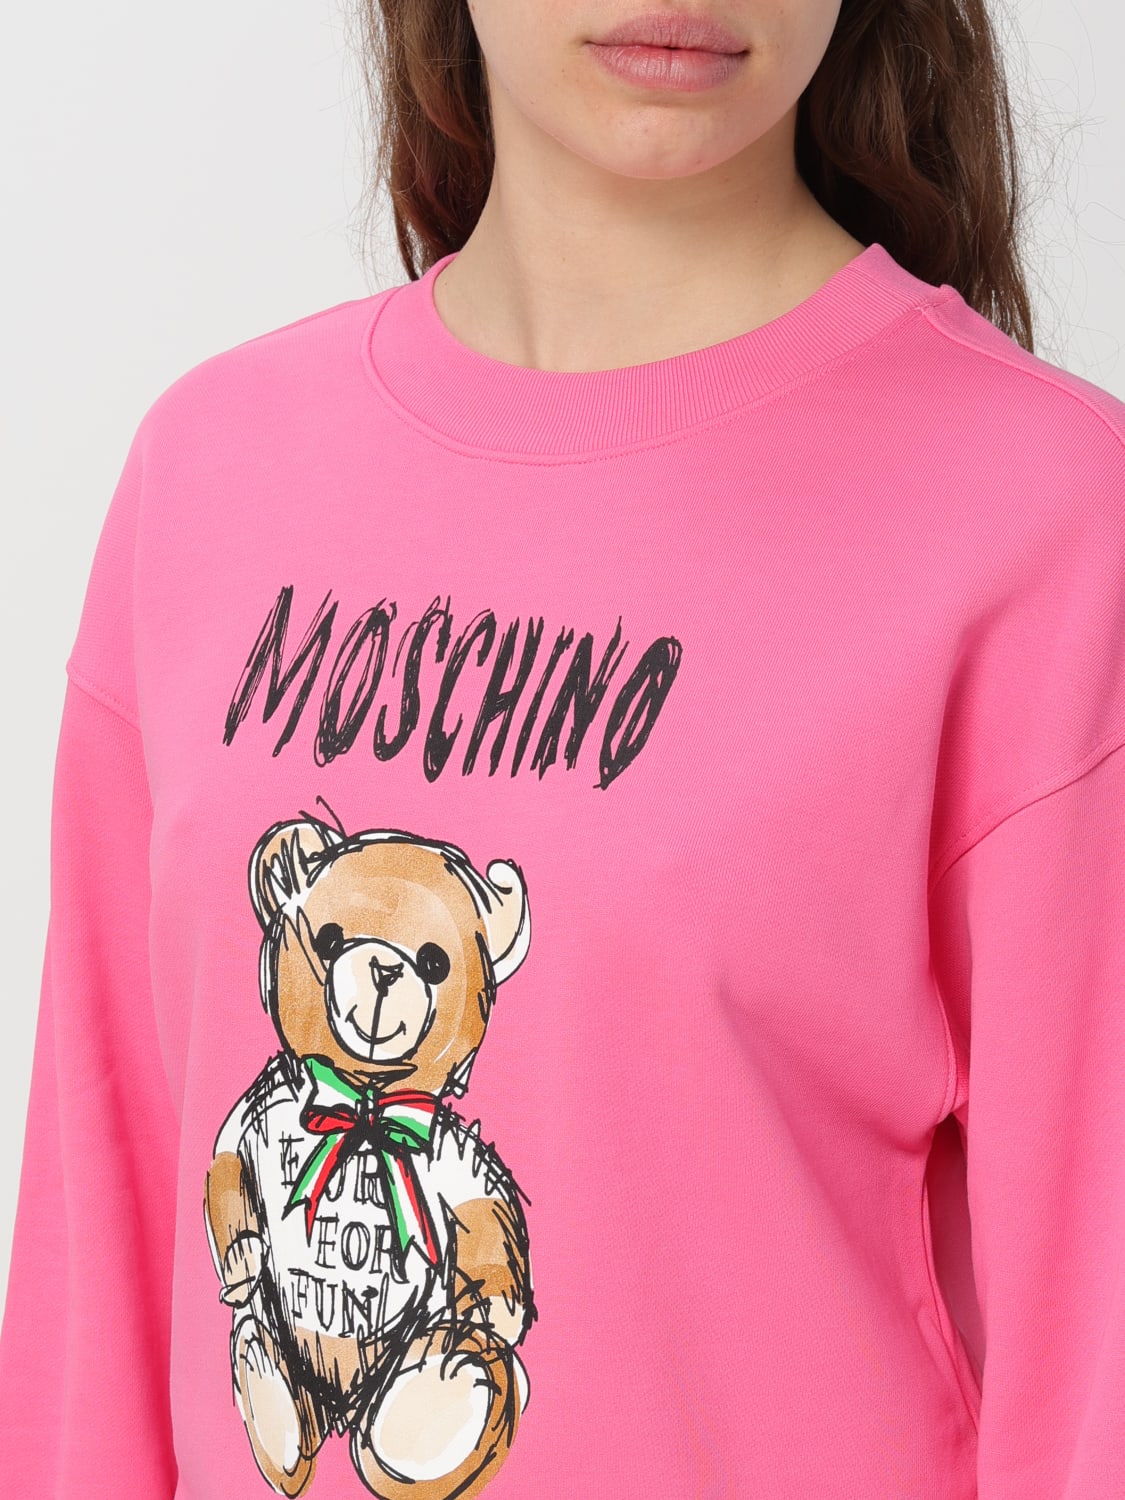 Women's Moschino Clothing Sale, Up to 70% Off